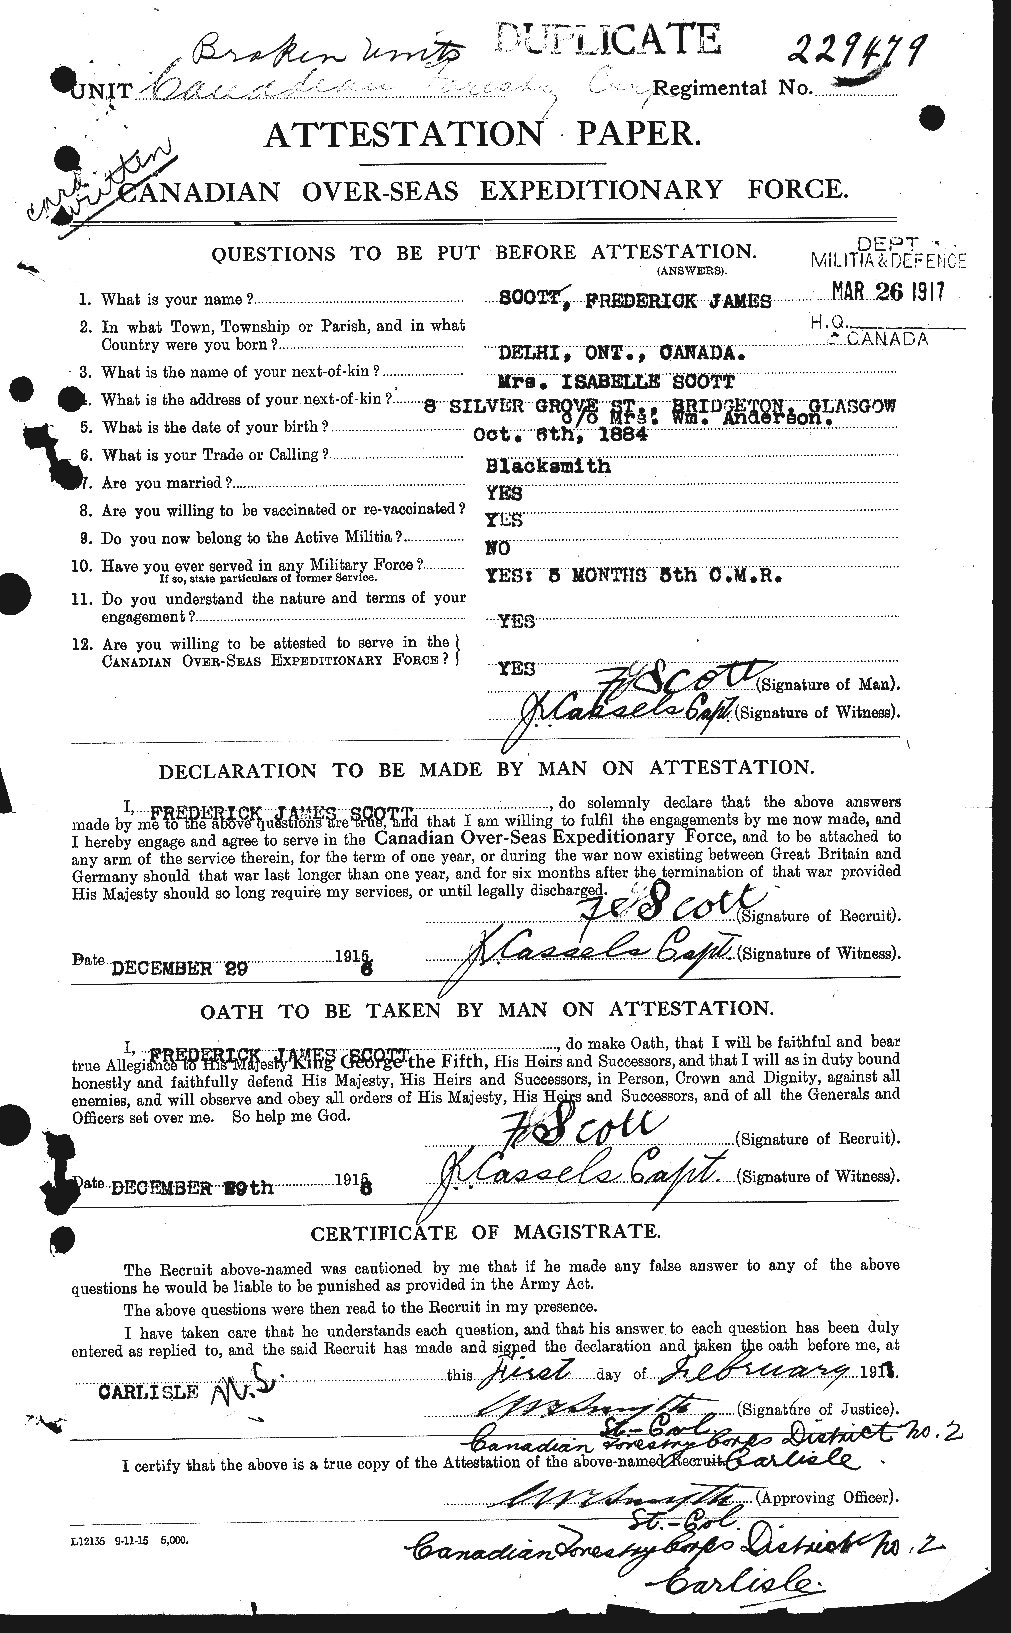 Personnel Records of the First World War - CEF 084388a